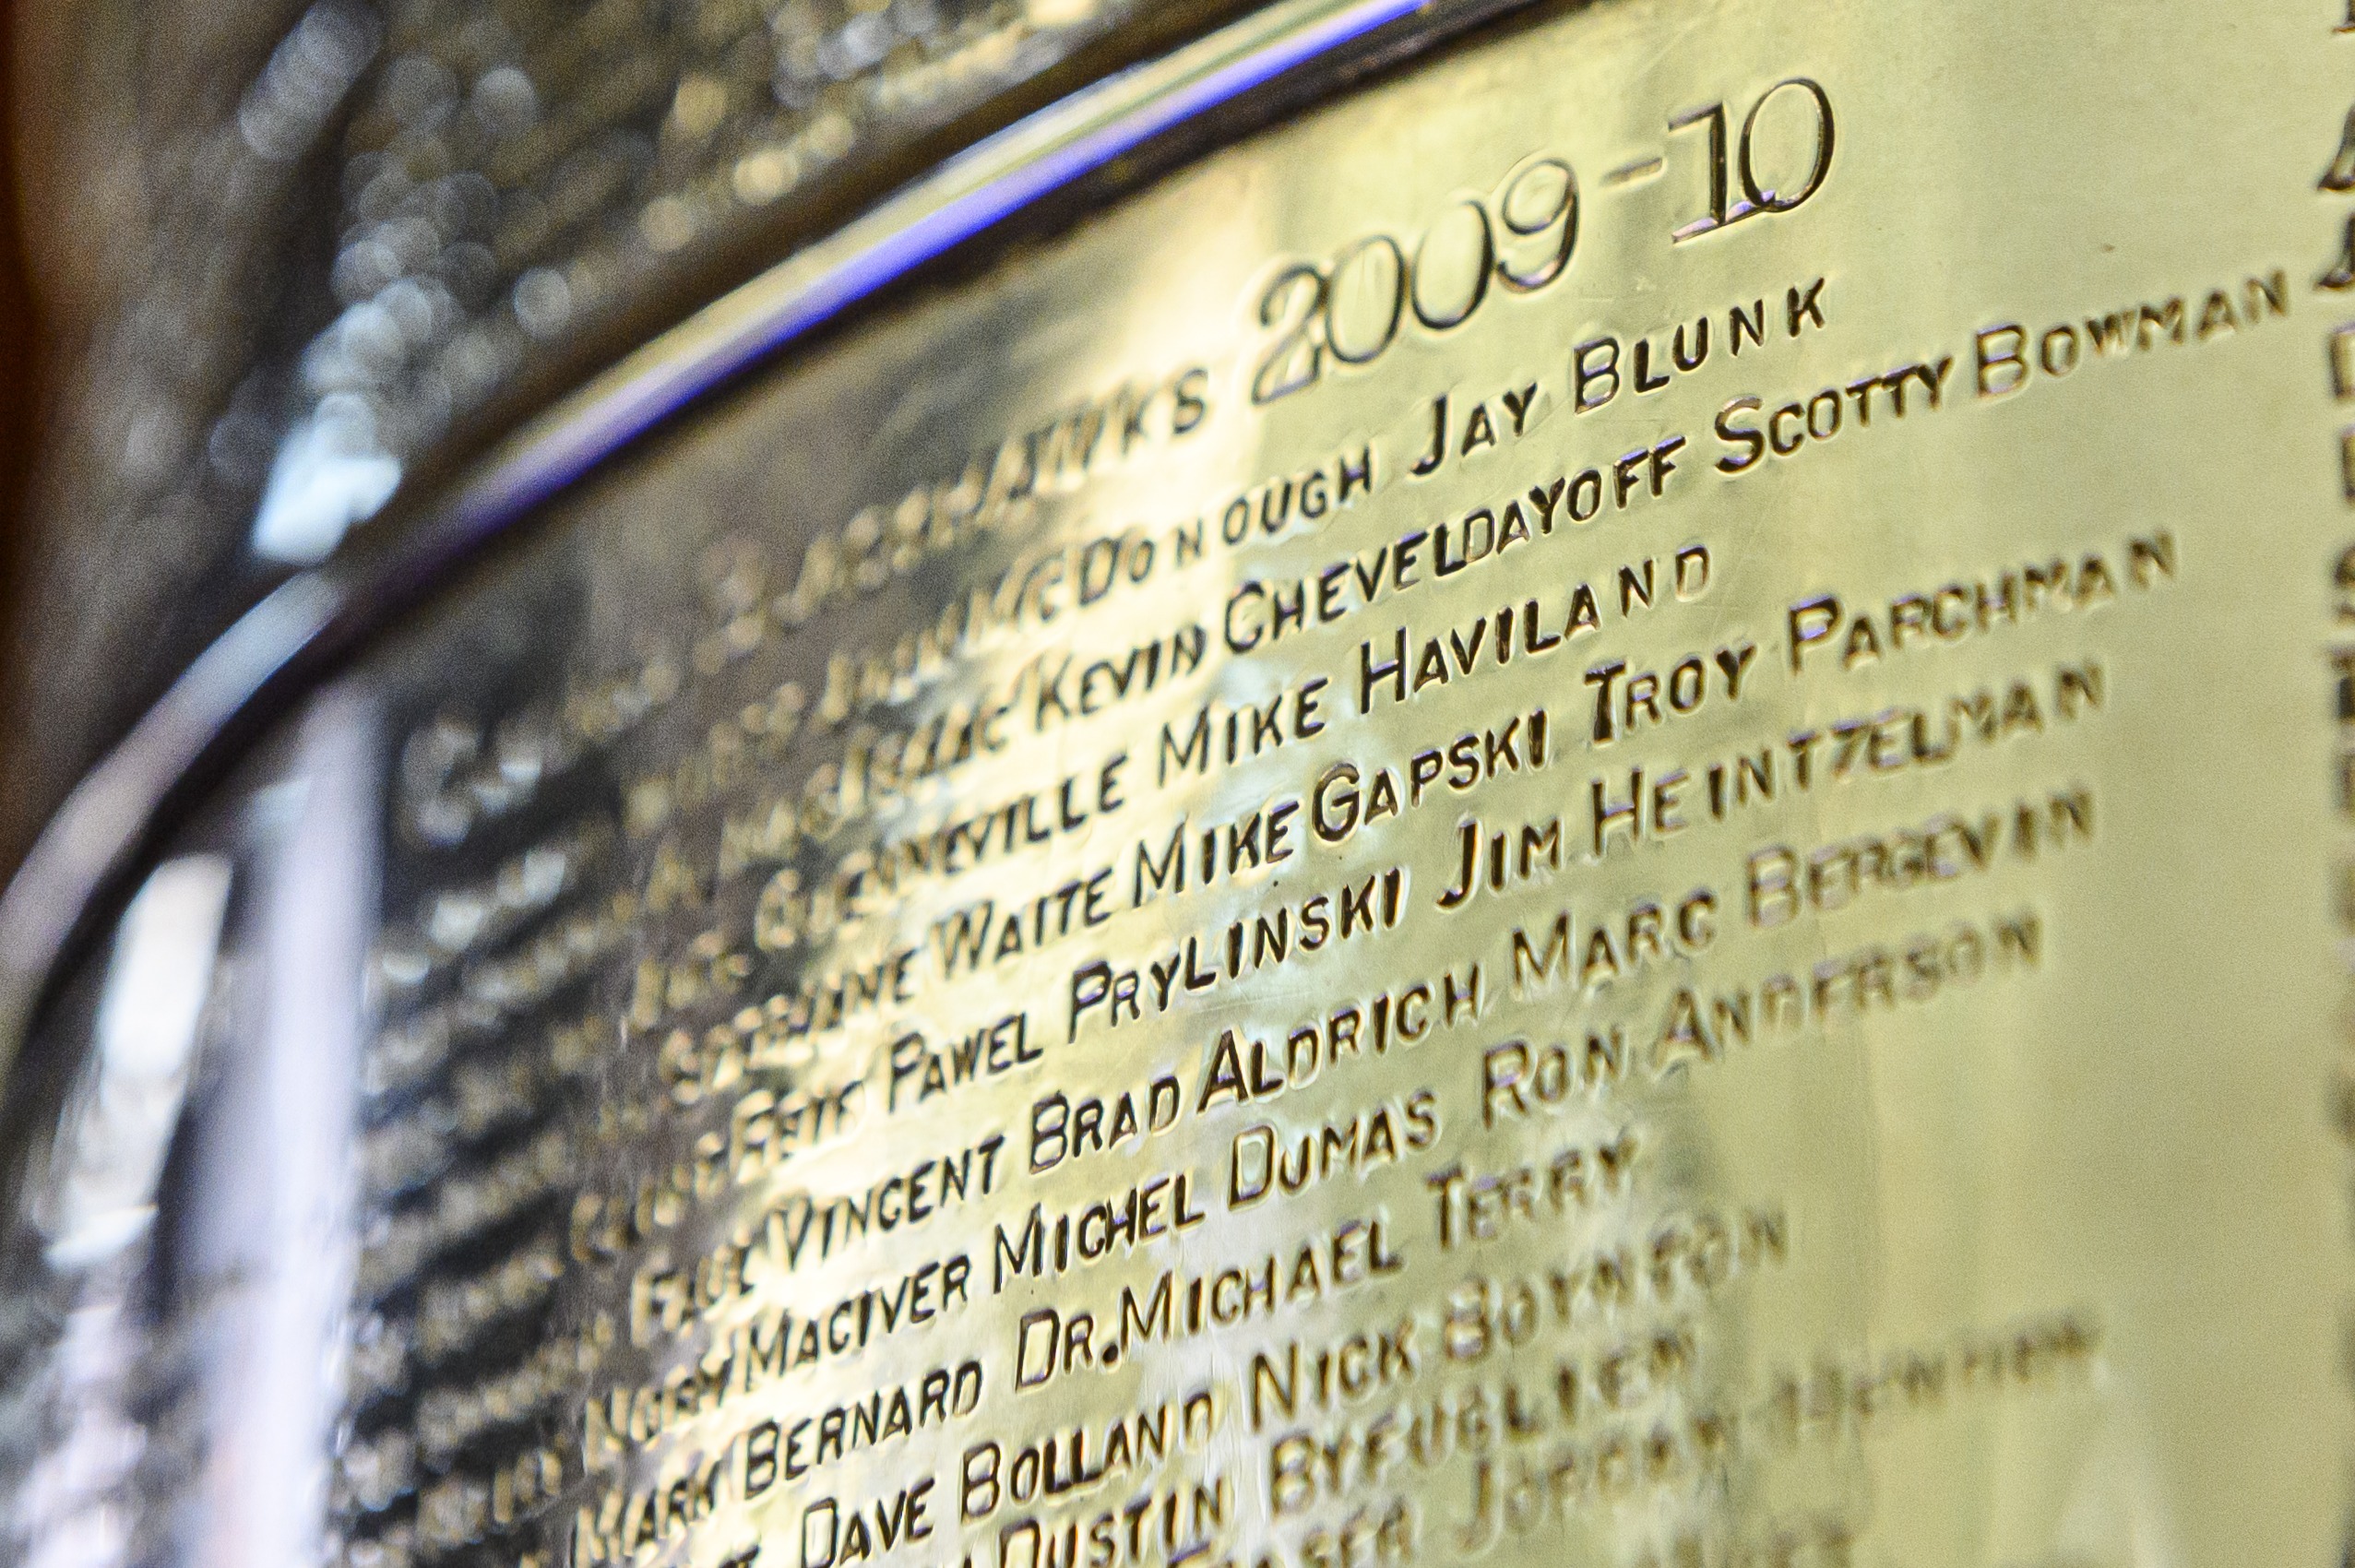 Brad Aldrich's name crossed out on Stanley Cup by Hockey Hall of